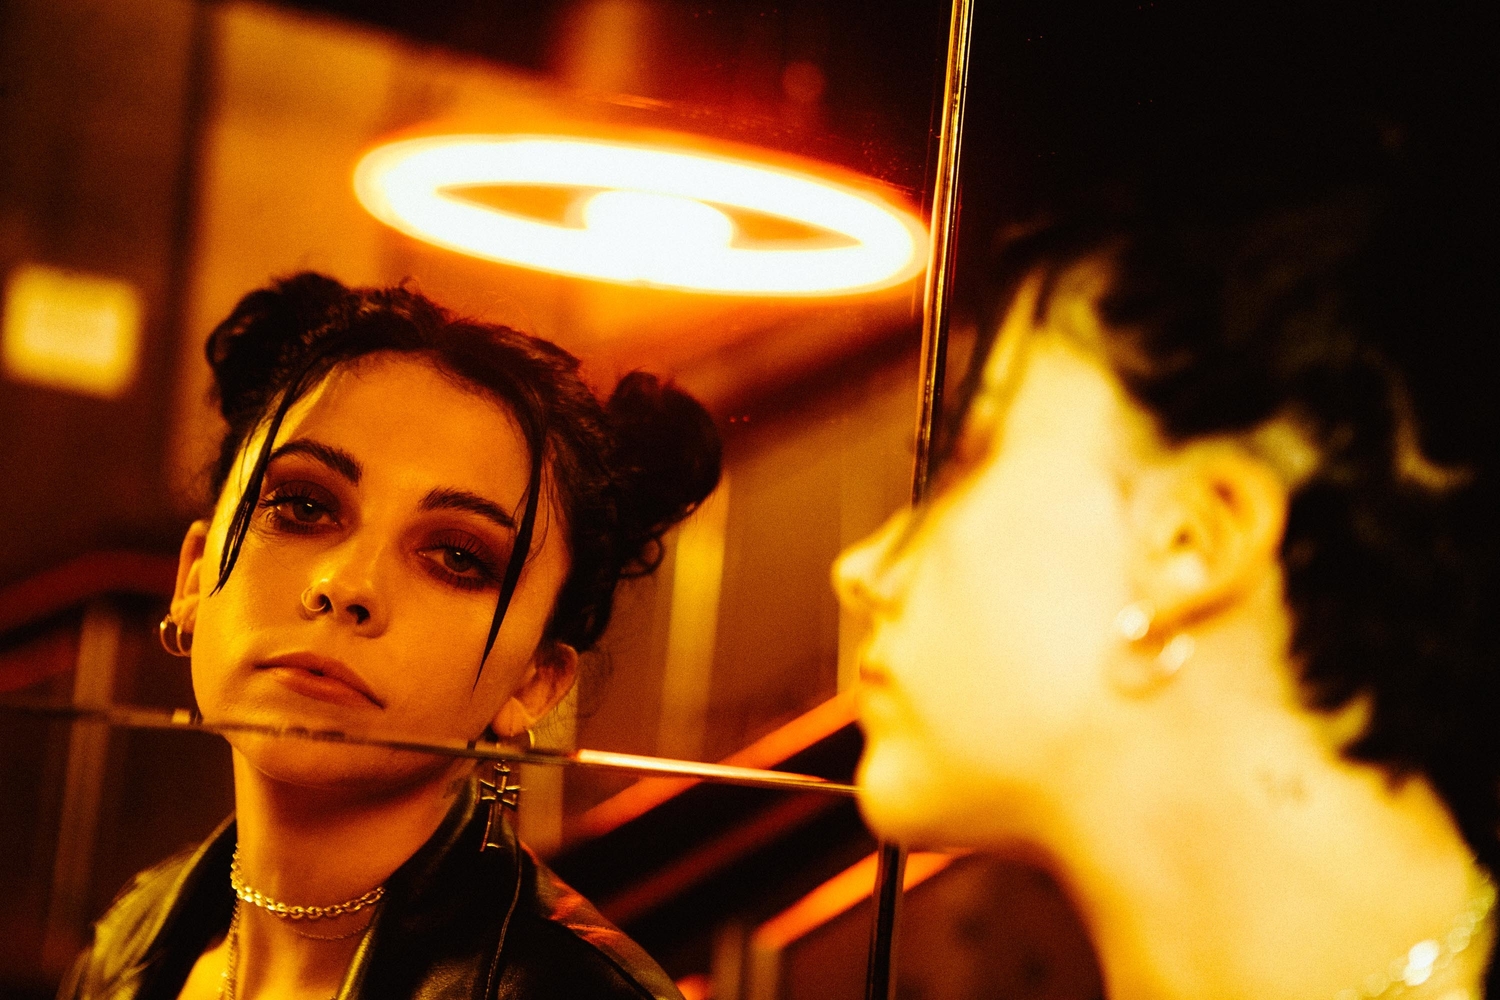 Pale Waves & Lawrence Rothman team up for new track ‘SkinDeepSkyHighHeartWide’